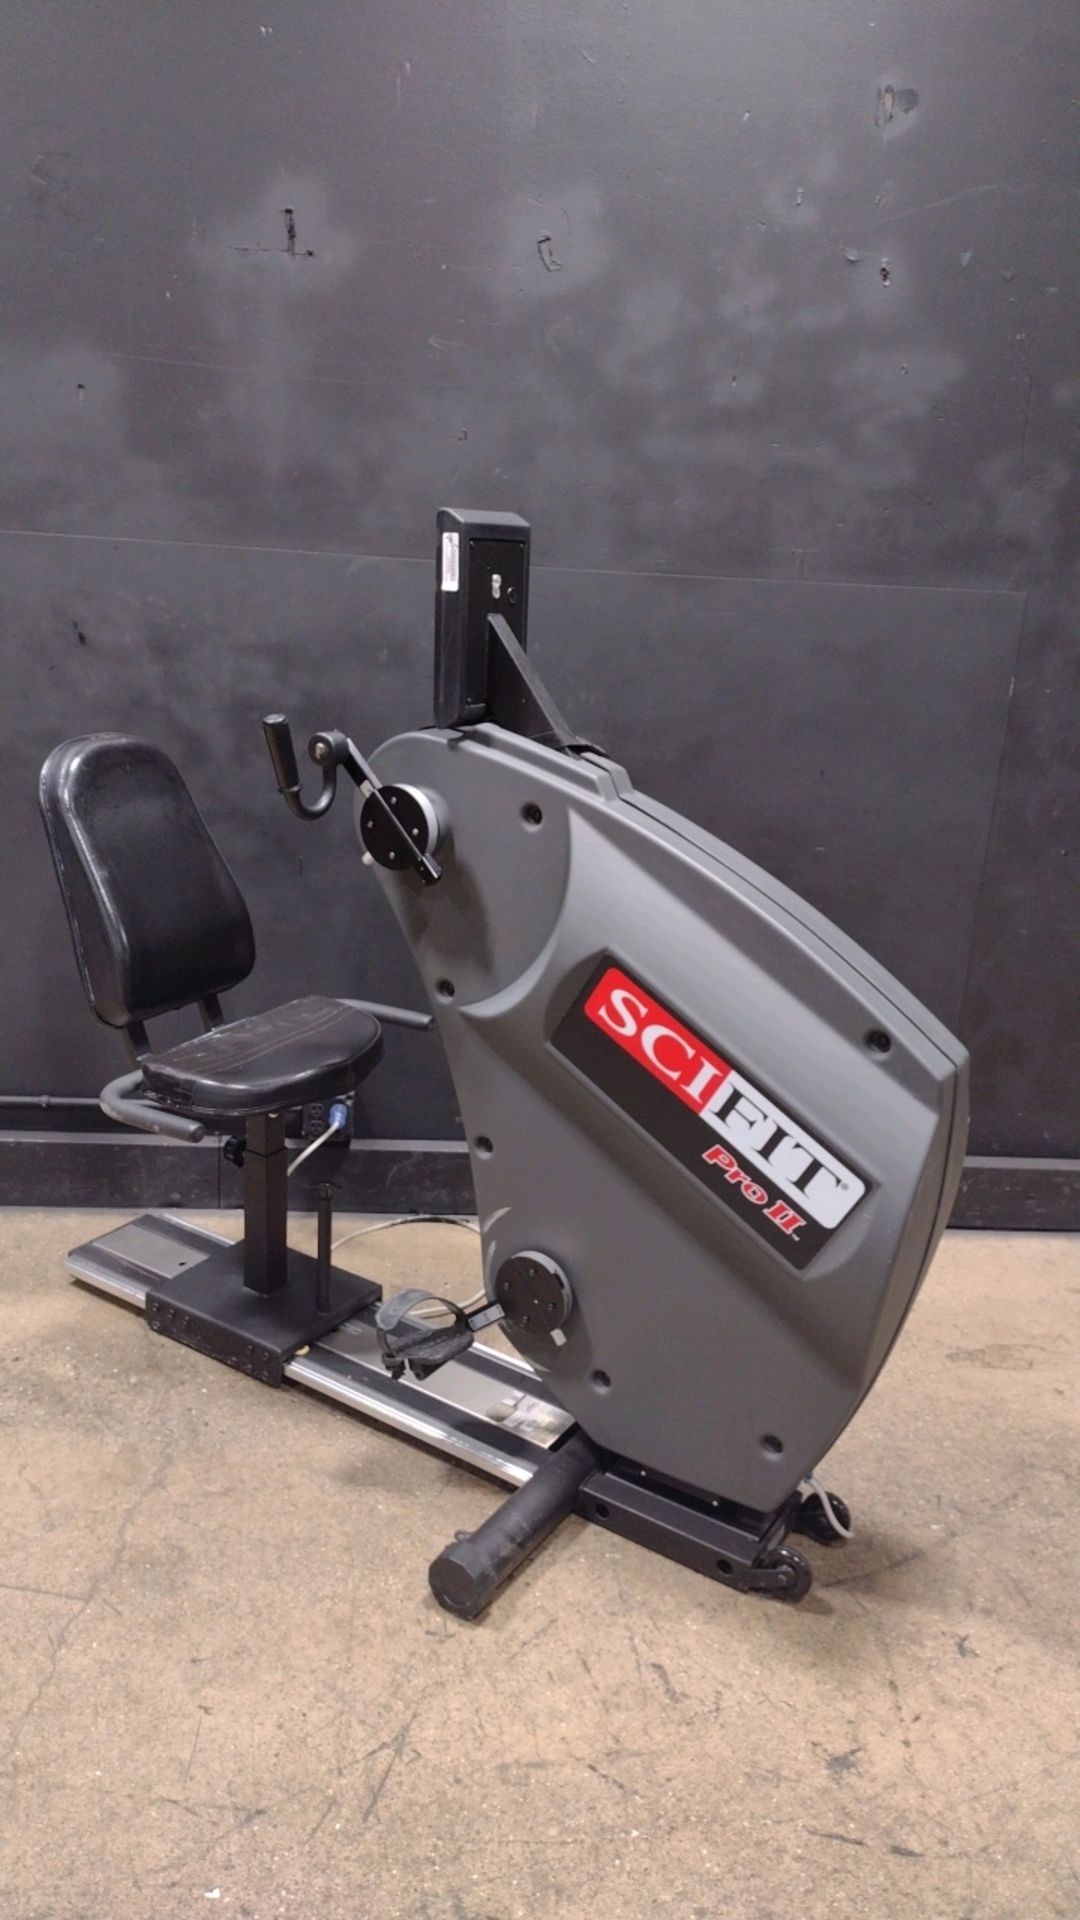 SCIFIT PRO II ERGOMETER (LOCATED AT 3325 MOUNT PROSPECT ROAD, FRANKLIN PARK, IL, 60131) - Image 3 of 4